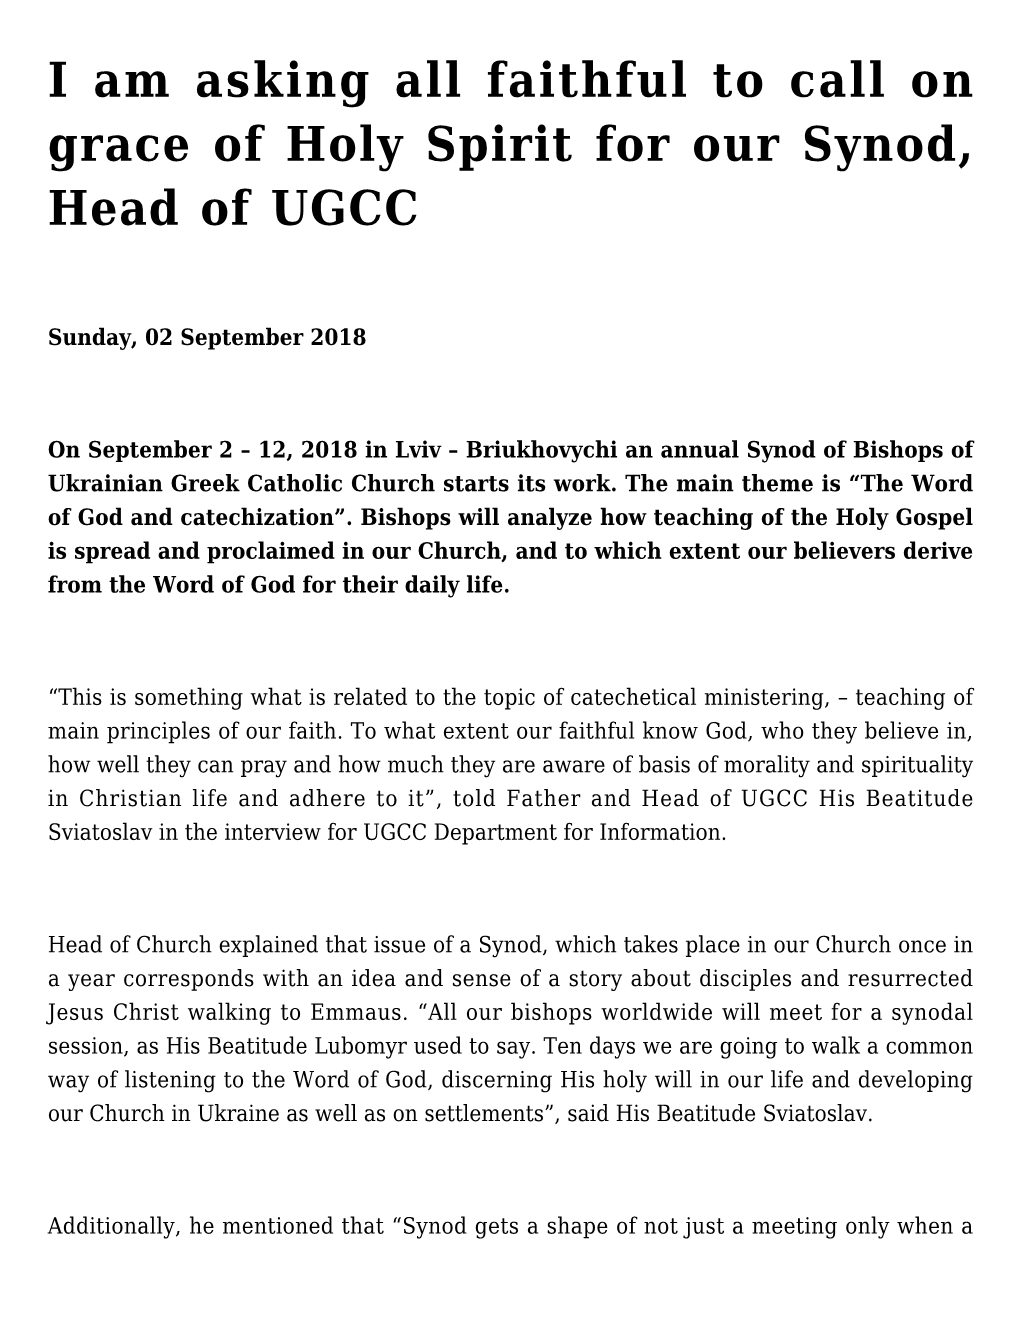 I Am Asking All Faithful to Call on Grace of Holy Spirit for Our Synod, Head of UGCC,The Head of the UGCC on Independence Day Of